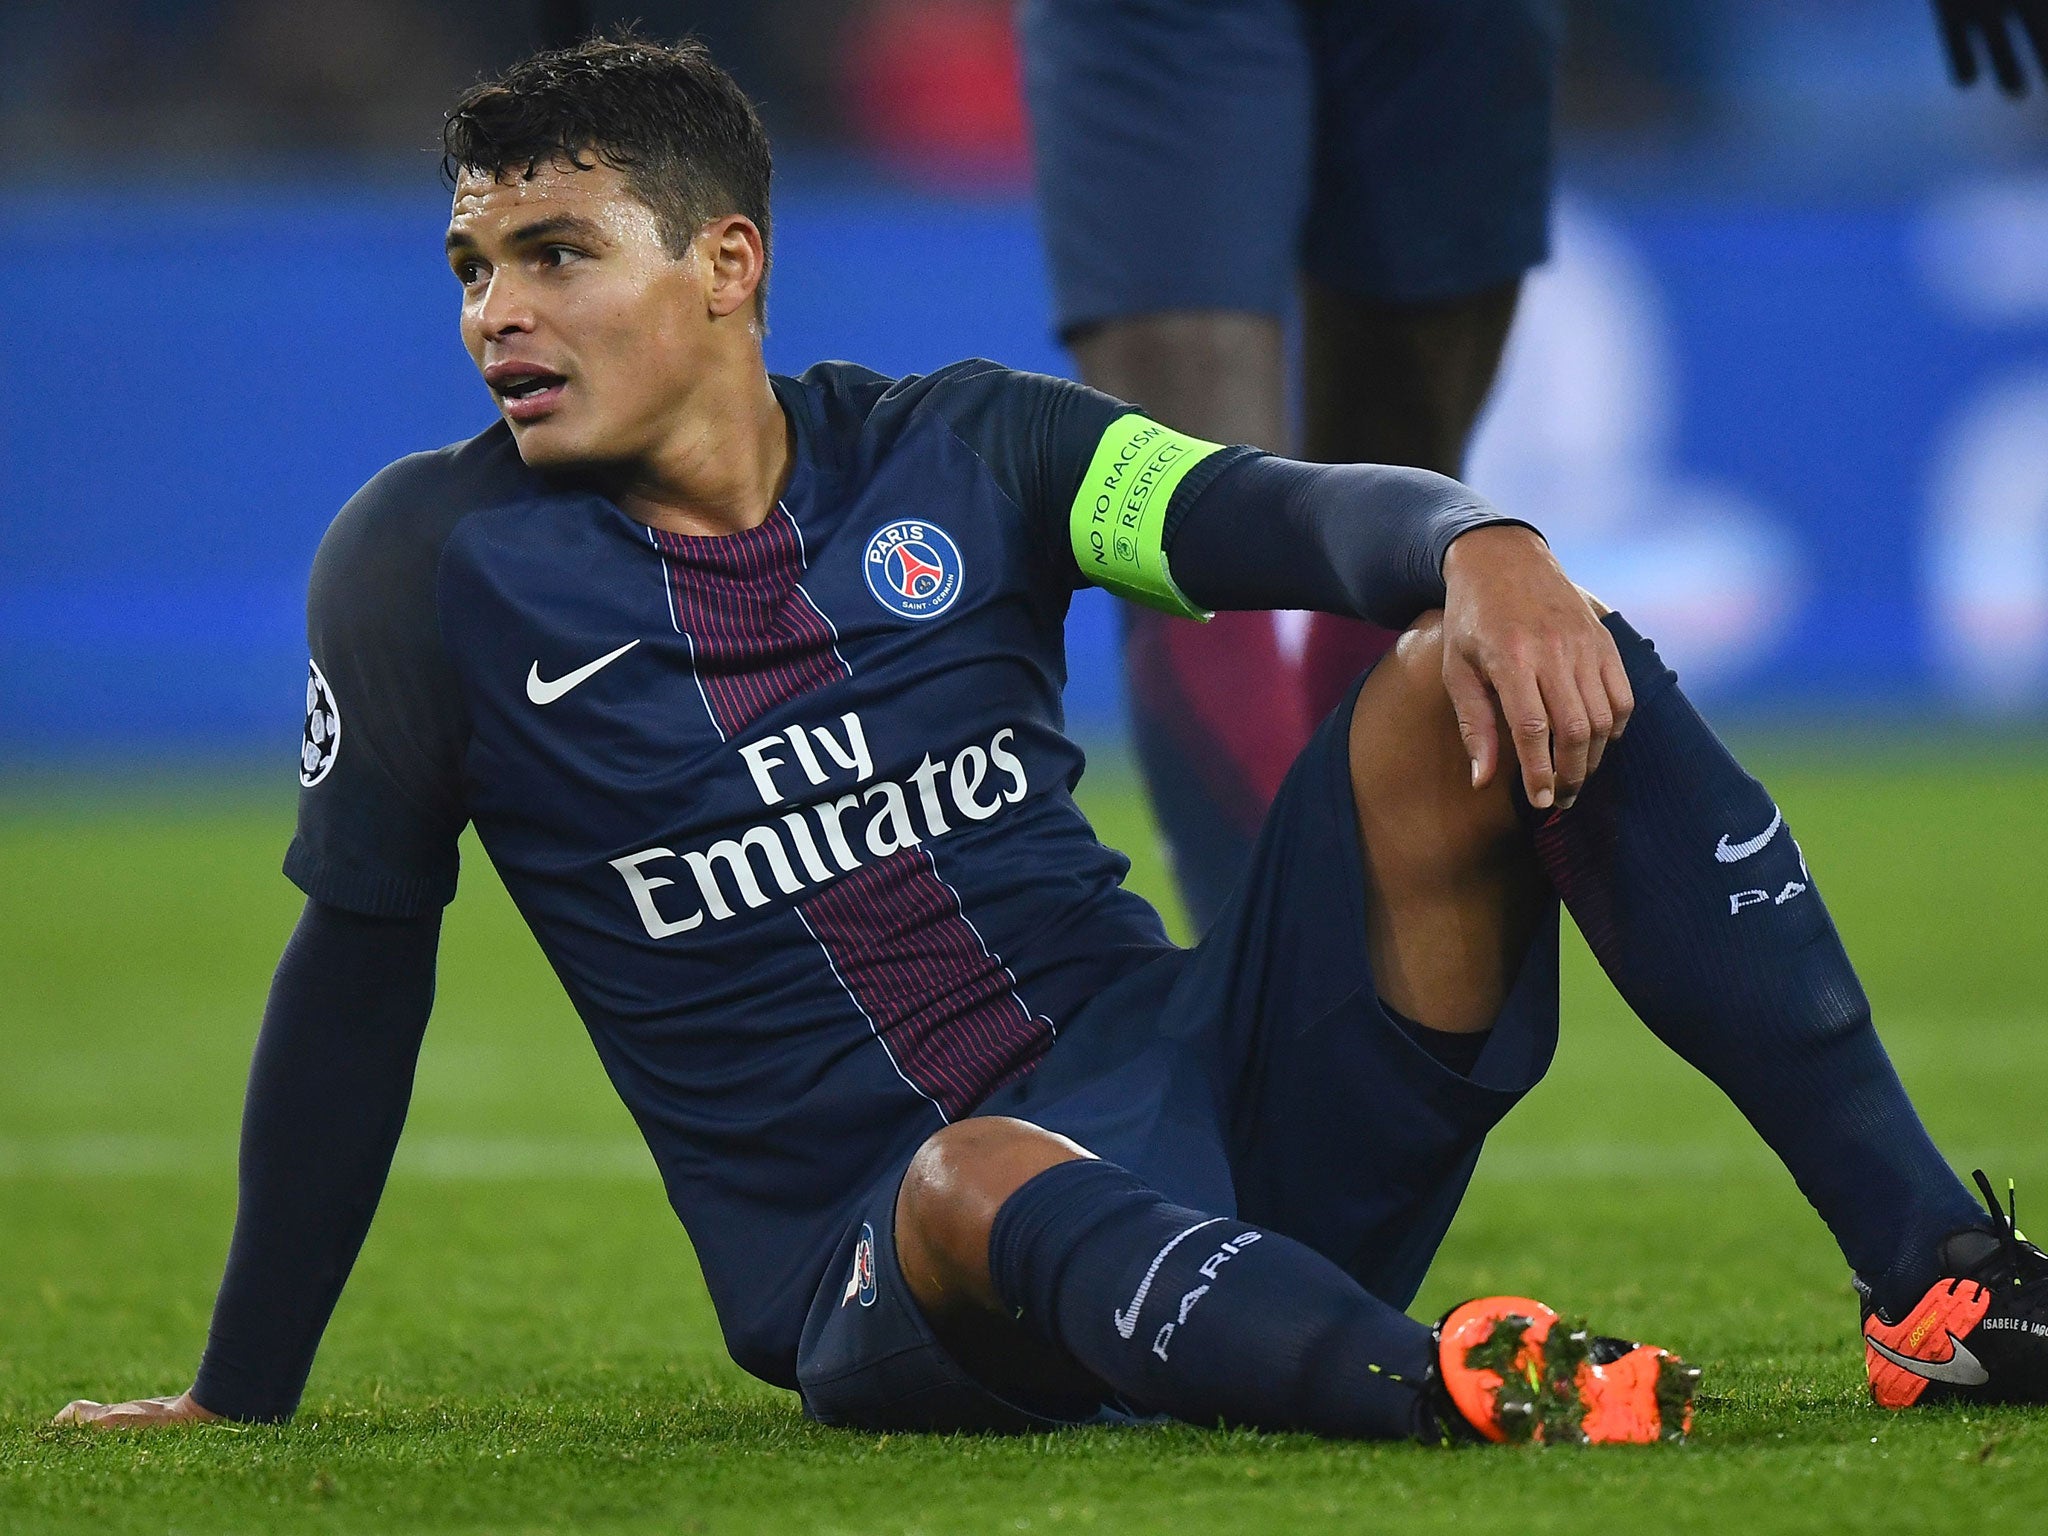 Paris Saint-Germain's Brazilian defender Thiago Silva looks on in disappointment as his side were held to a 2-2 draw